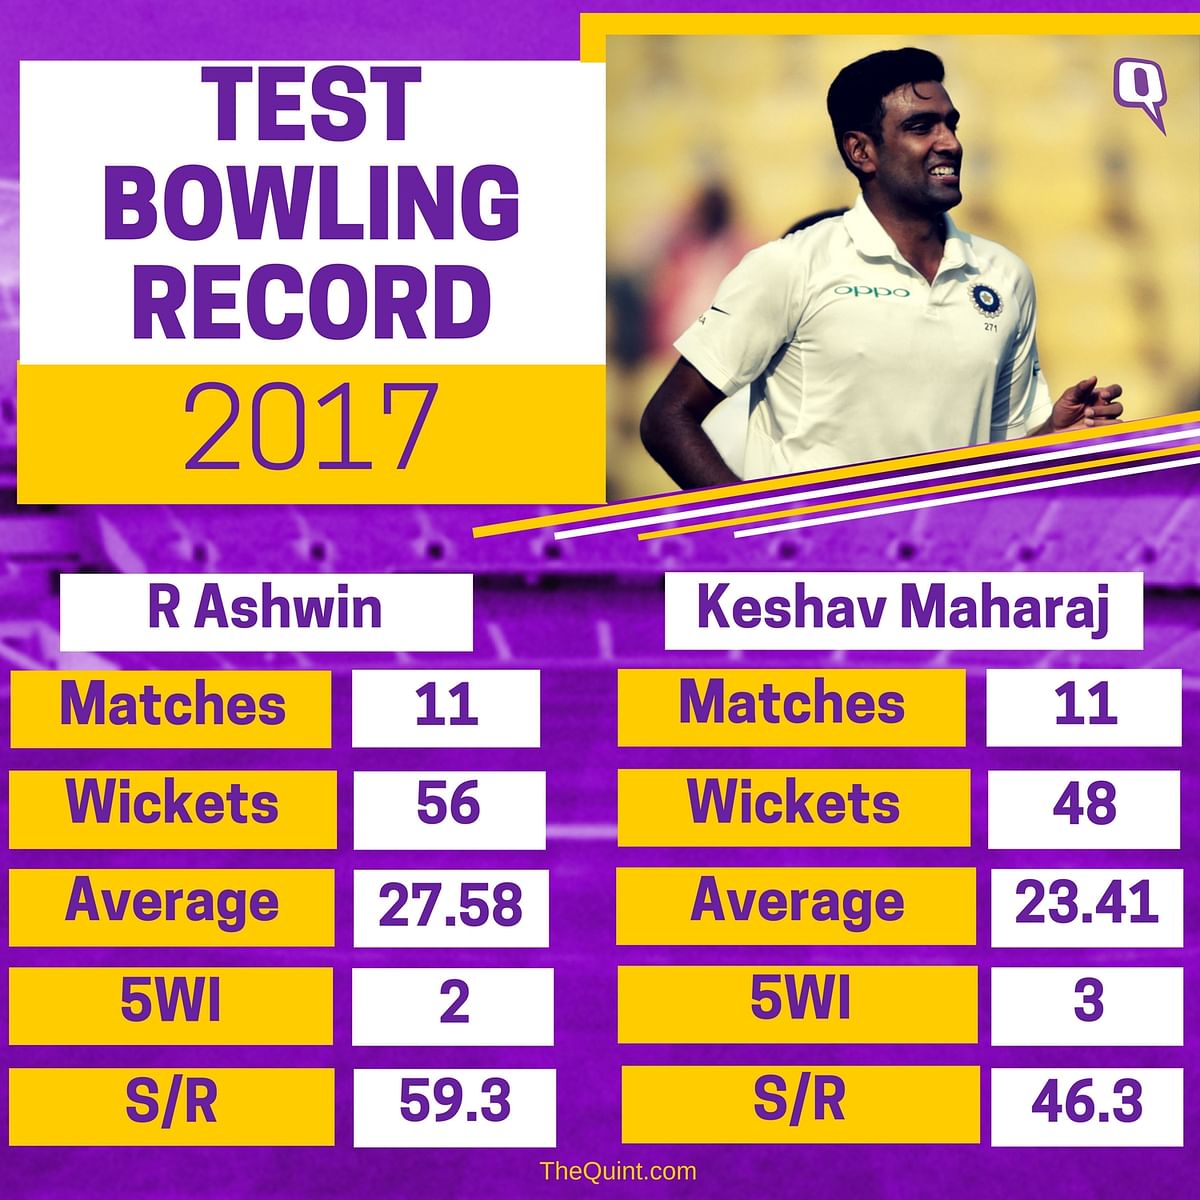 Ahead of the first Test between India and SA, here’s a comparison of form between counterparts in both the sides.